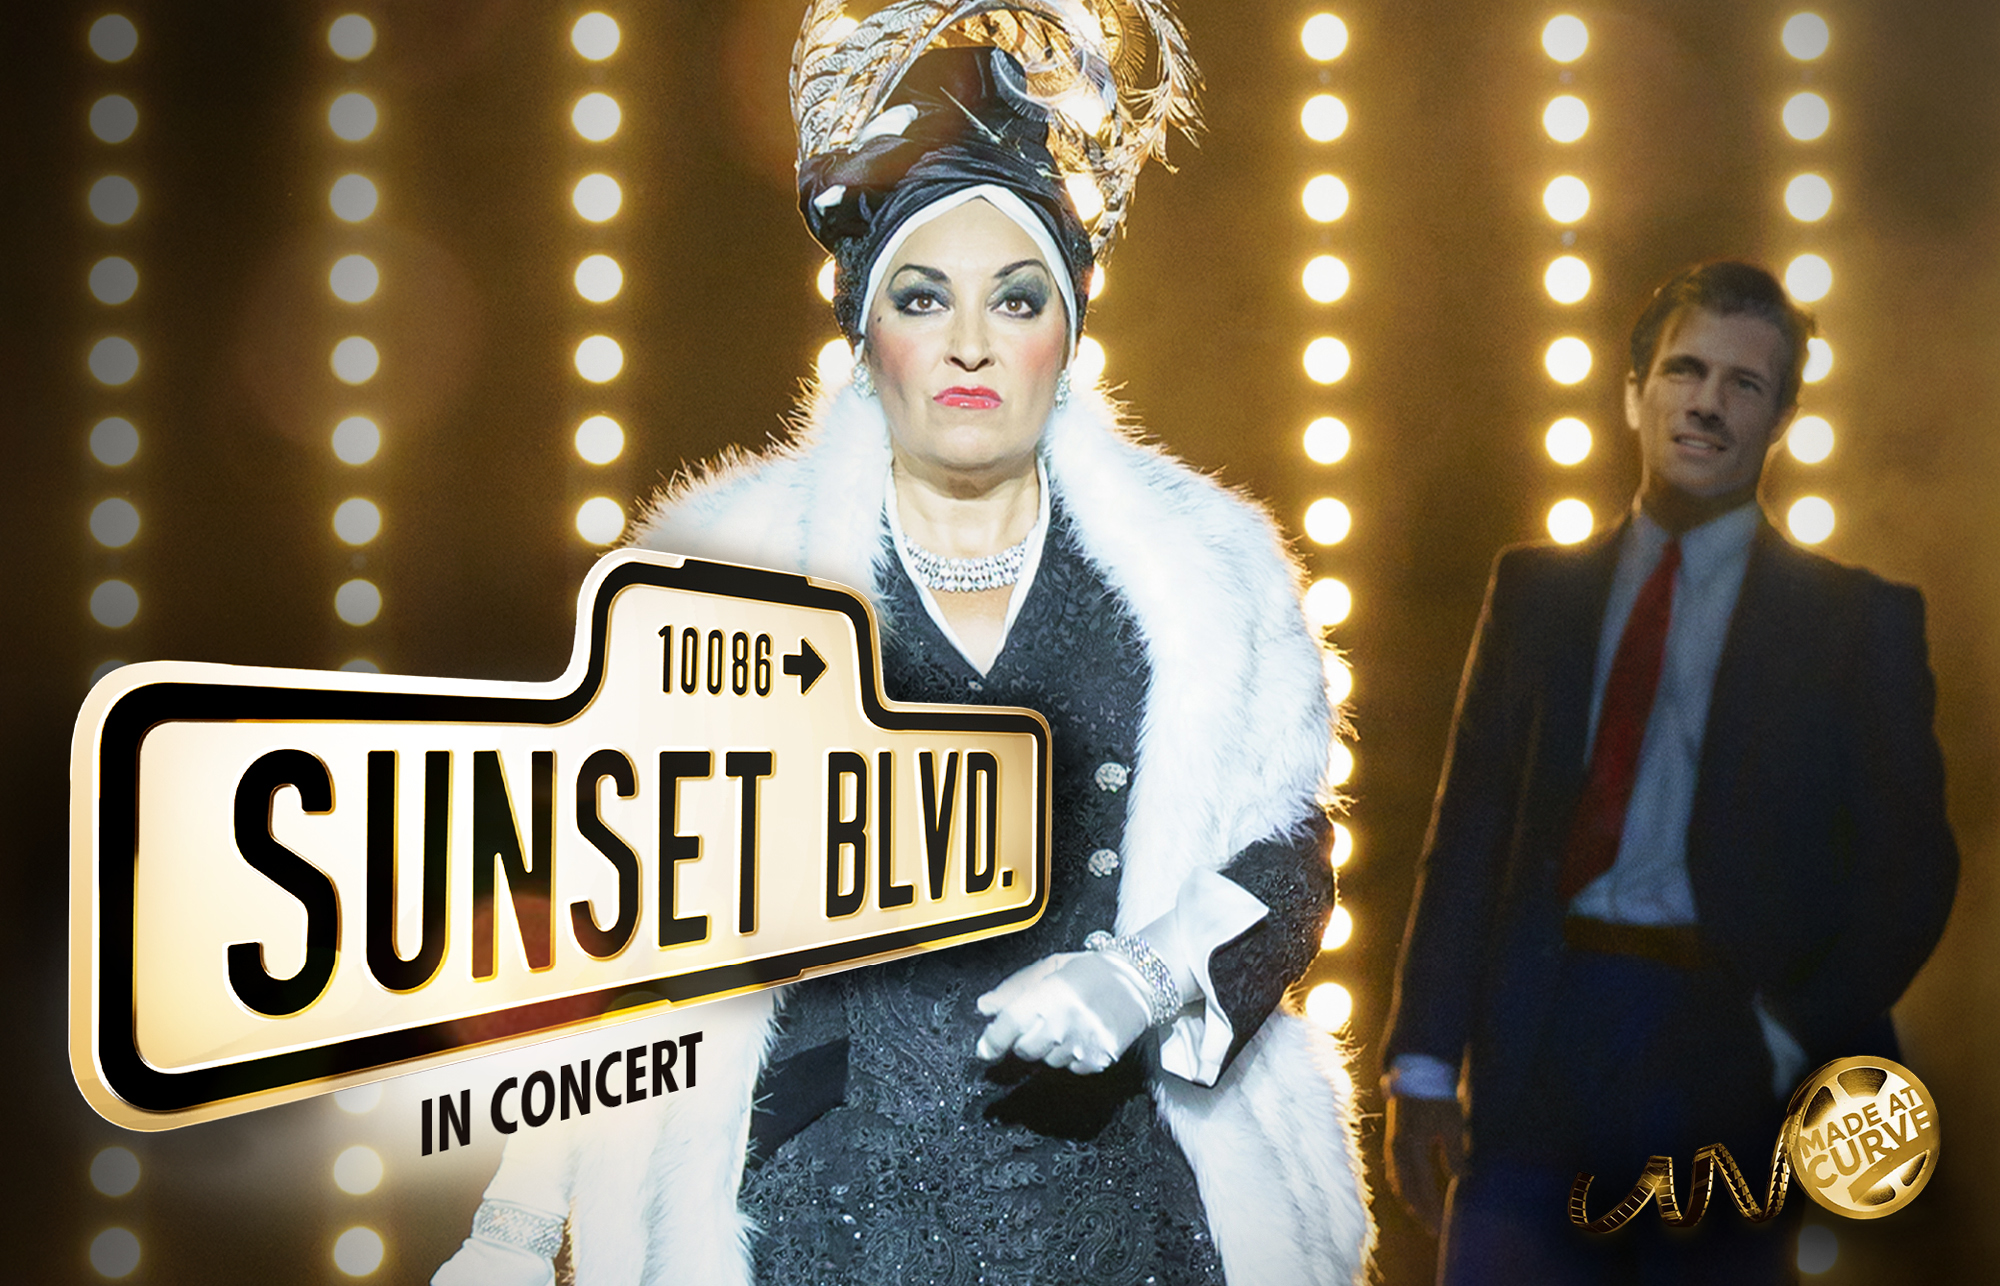 Promotional artwork for Sunset Boulevard in Concert featuring Ria Jones as Norma Desmond and Danny Mac as Joe Gillis in our 2017 production.